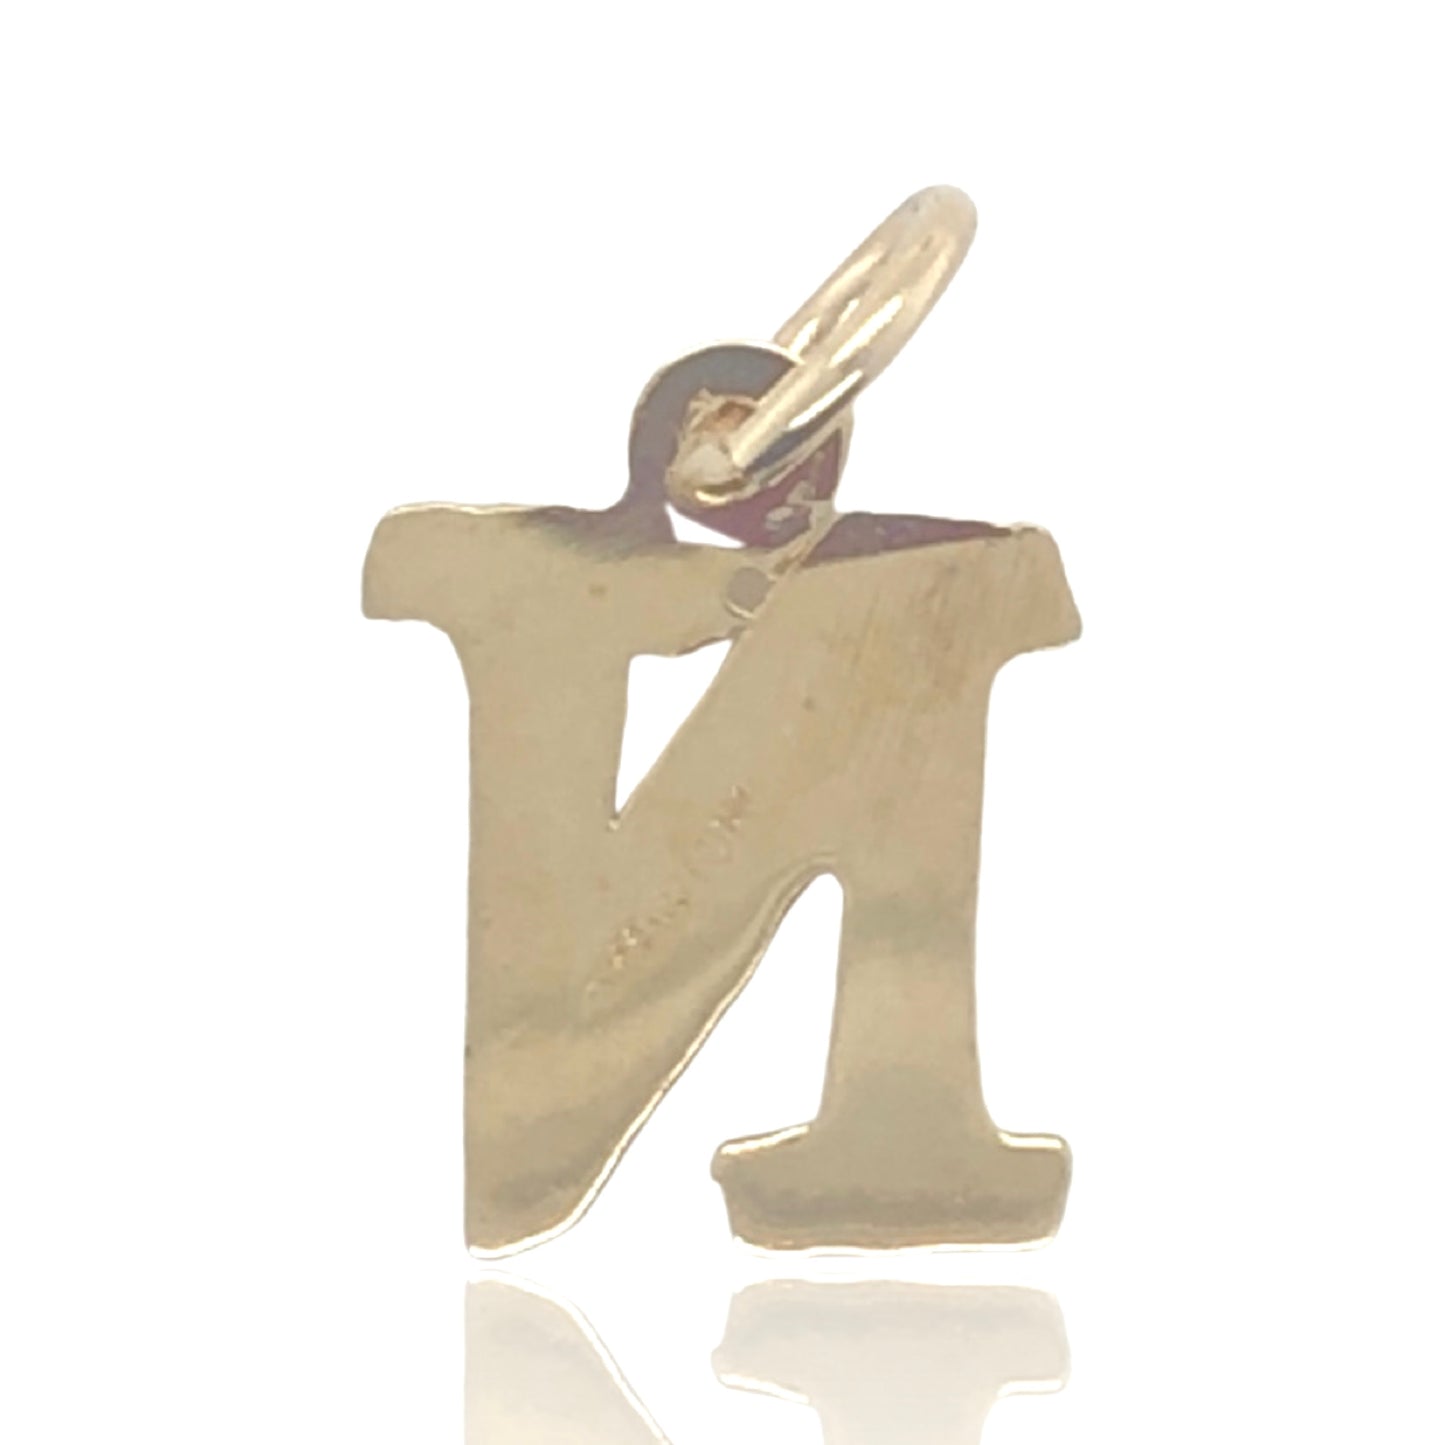 10K Yellow Gold Initial Charm Letter "N"